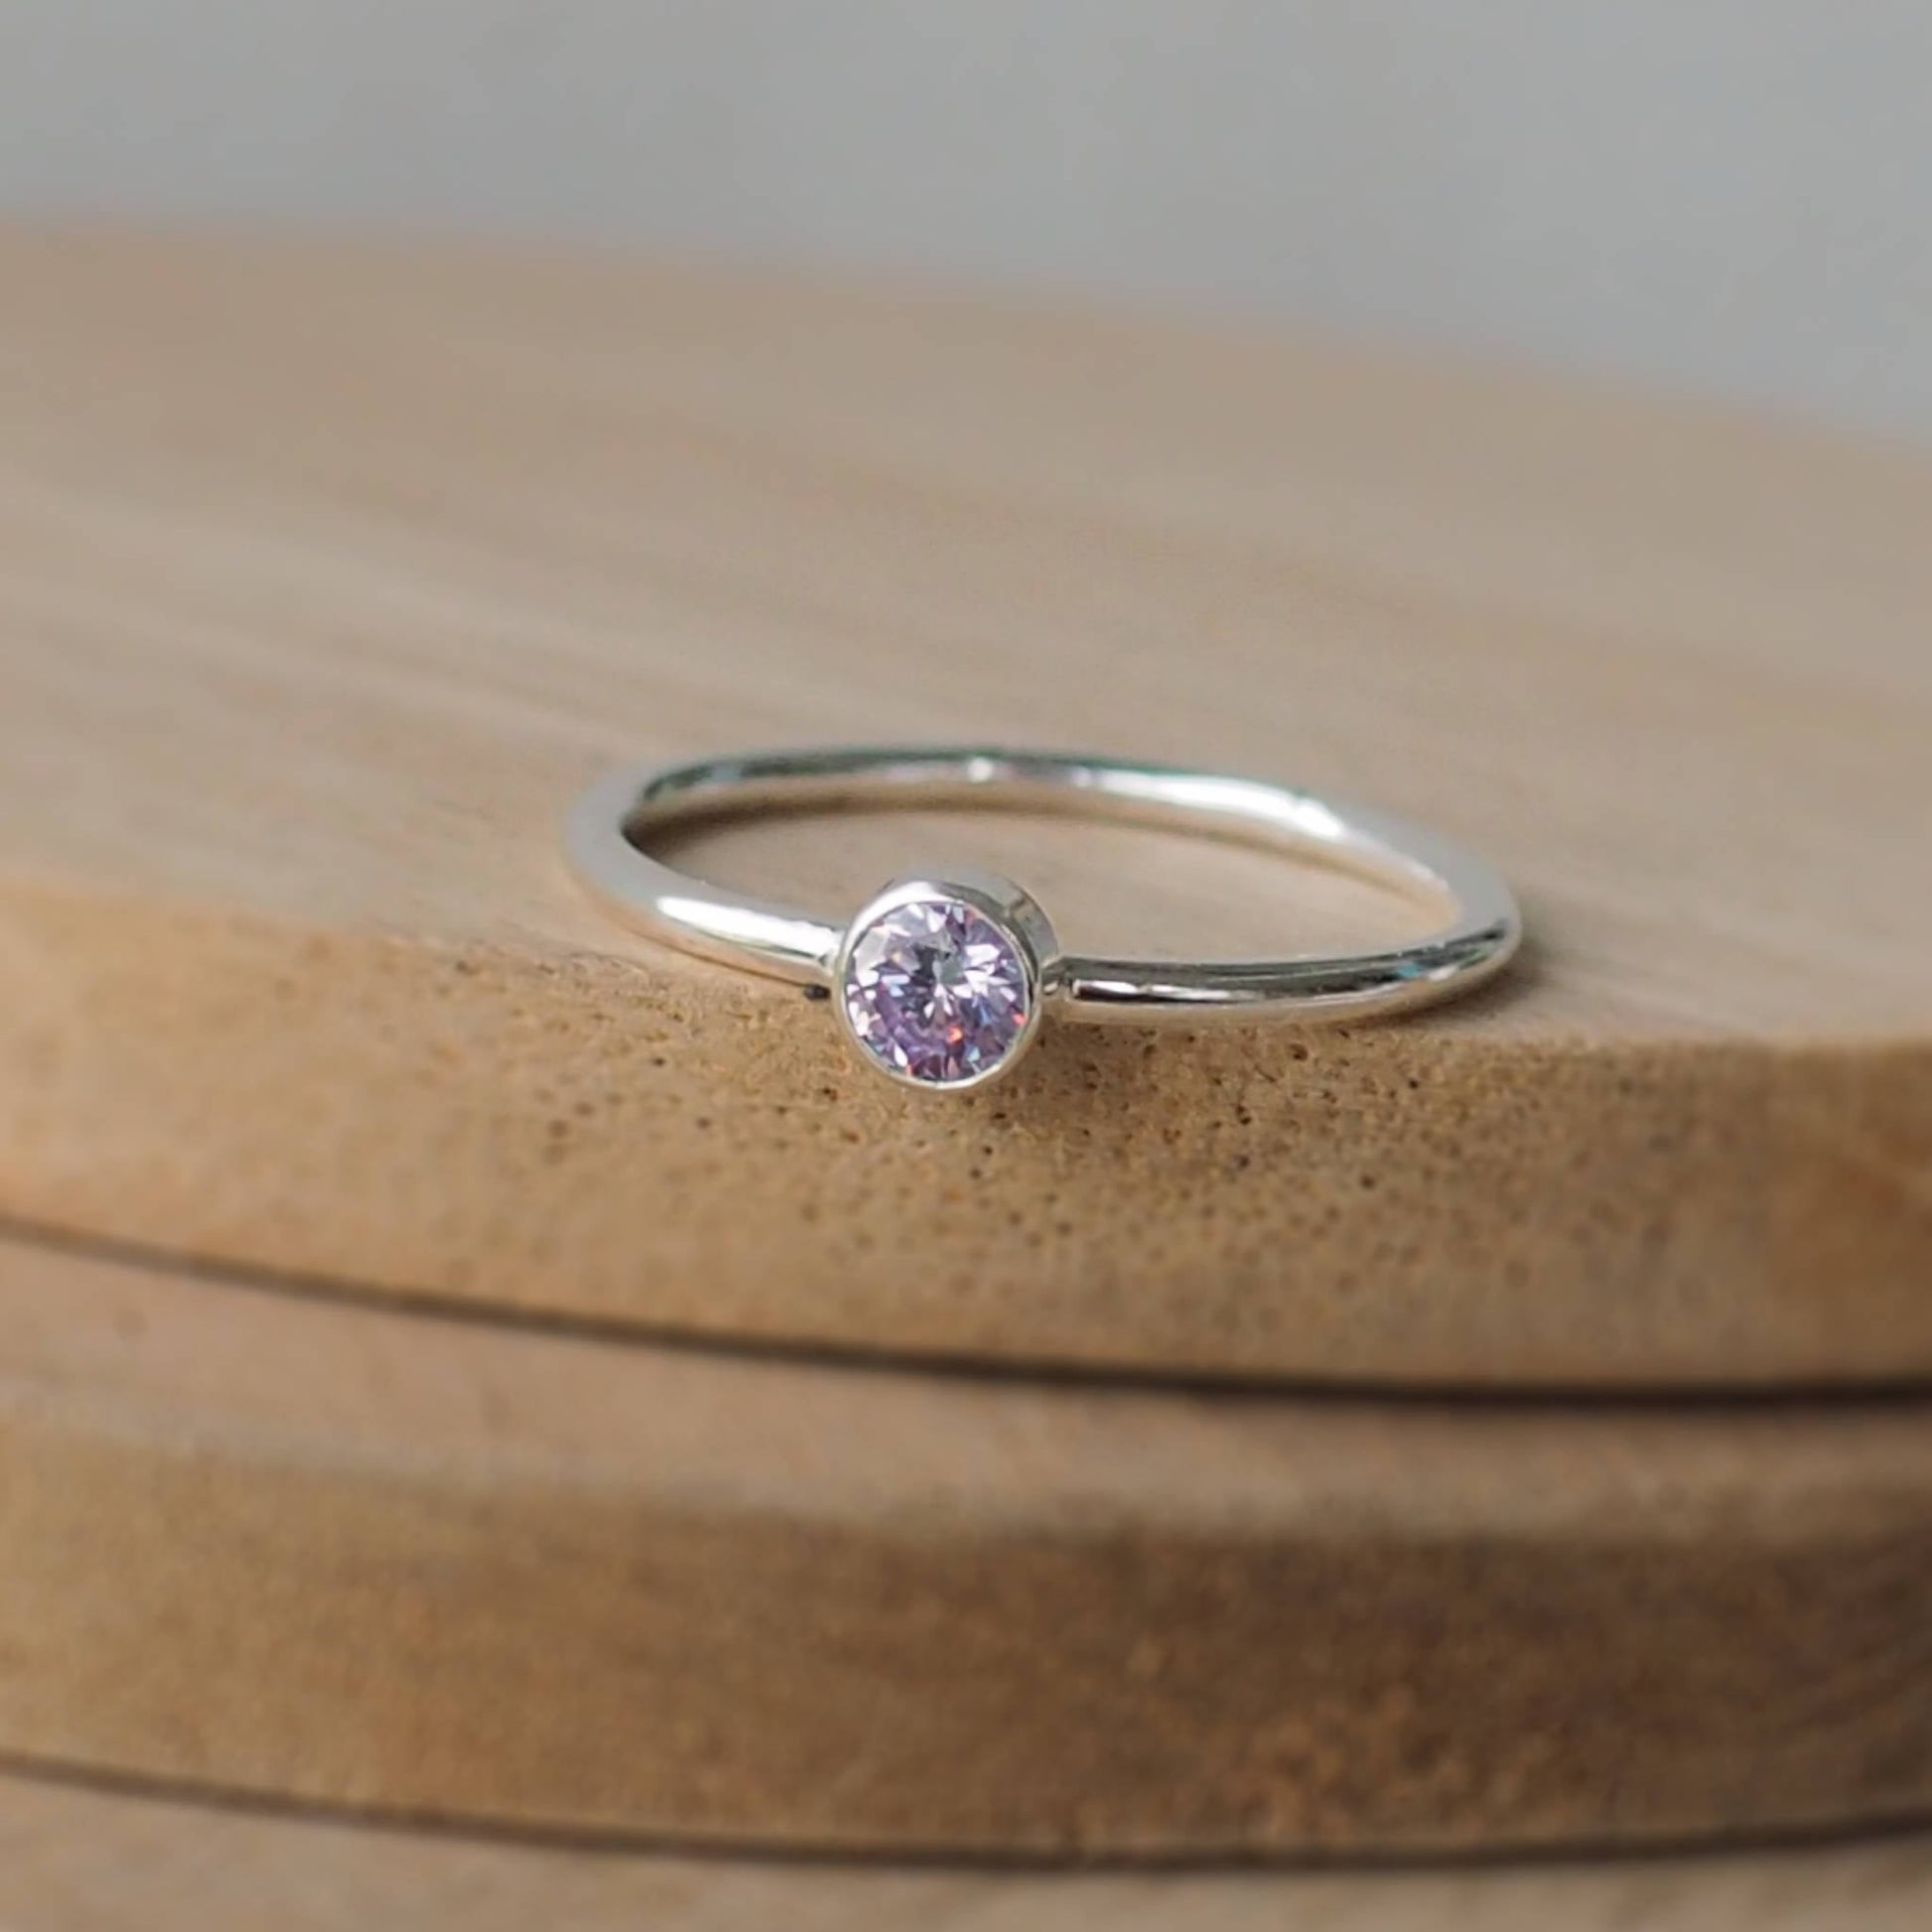 Silver ring with a Lavender Cubic Zirconia gemstone. The ring is simple in style with no embellishment , with a round wire band 1.5mm thick with a simple light purple alexandrite substitute 4mm round cubic zirconia stone set in an enclosed silver setting. Birthstone for June. The ring is Sterling Silver and made to your ring size. Handmade in Scotland by Maram Jewellery